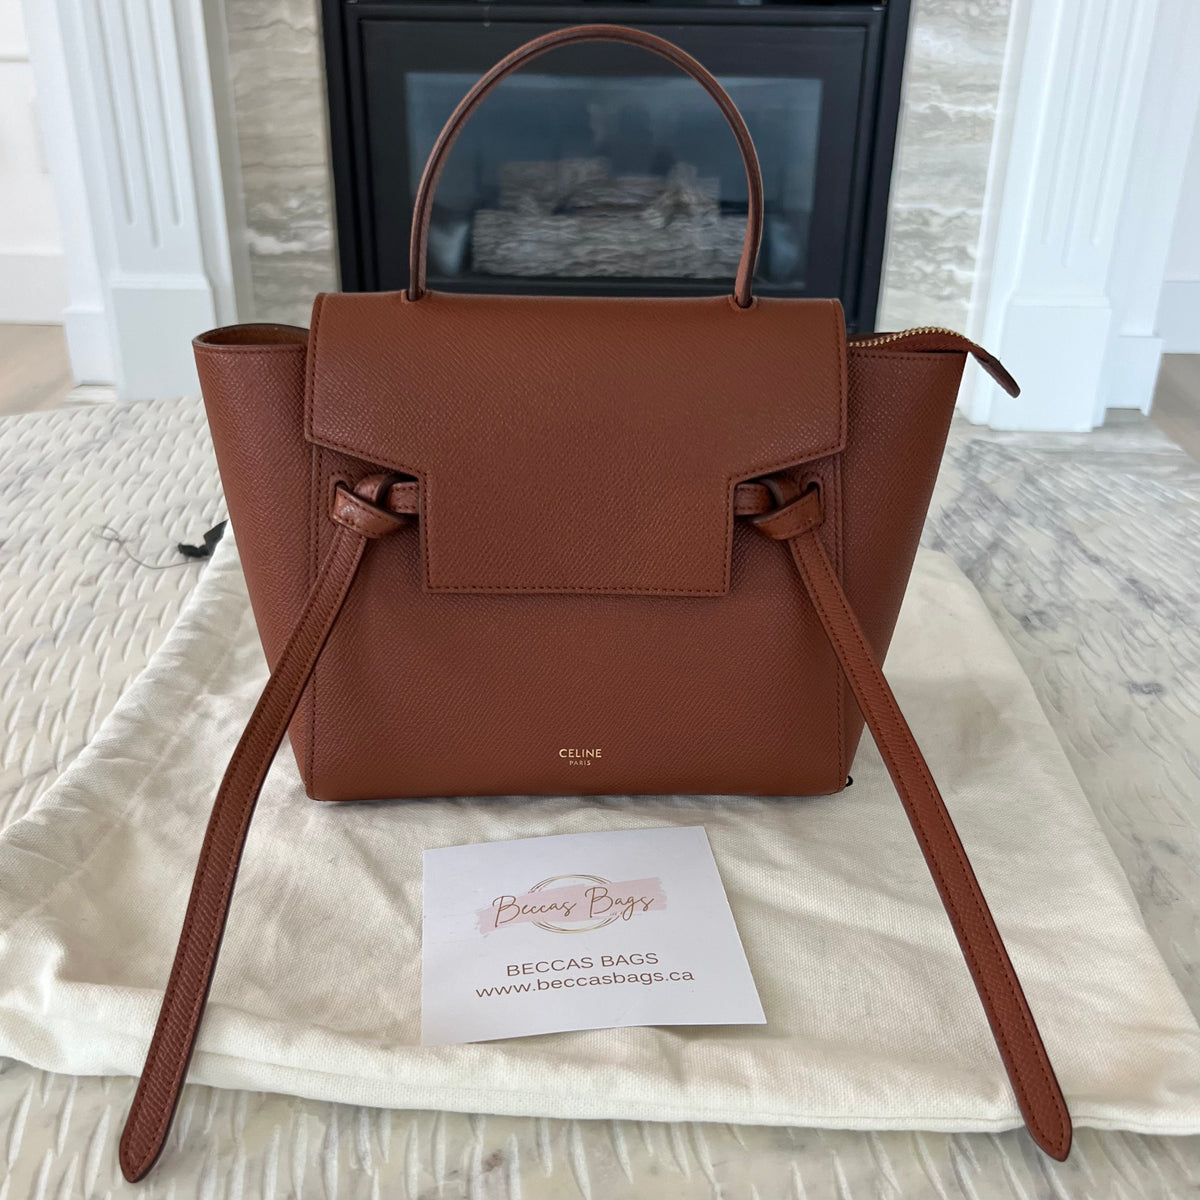 The Look For Less: Celine Belt Bag: $2,650 vs. $101 - THE BALLER ON A  BUDGET - An Affordable Fashion, Beauty & Lifestyle Blog